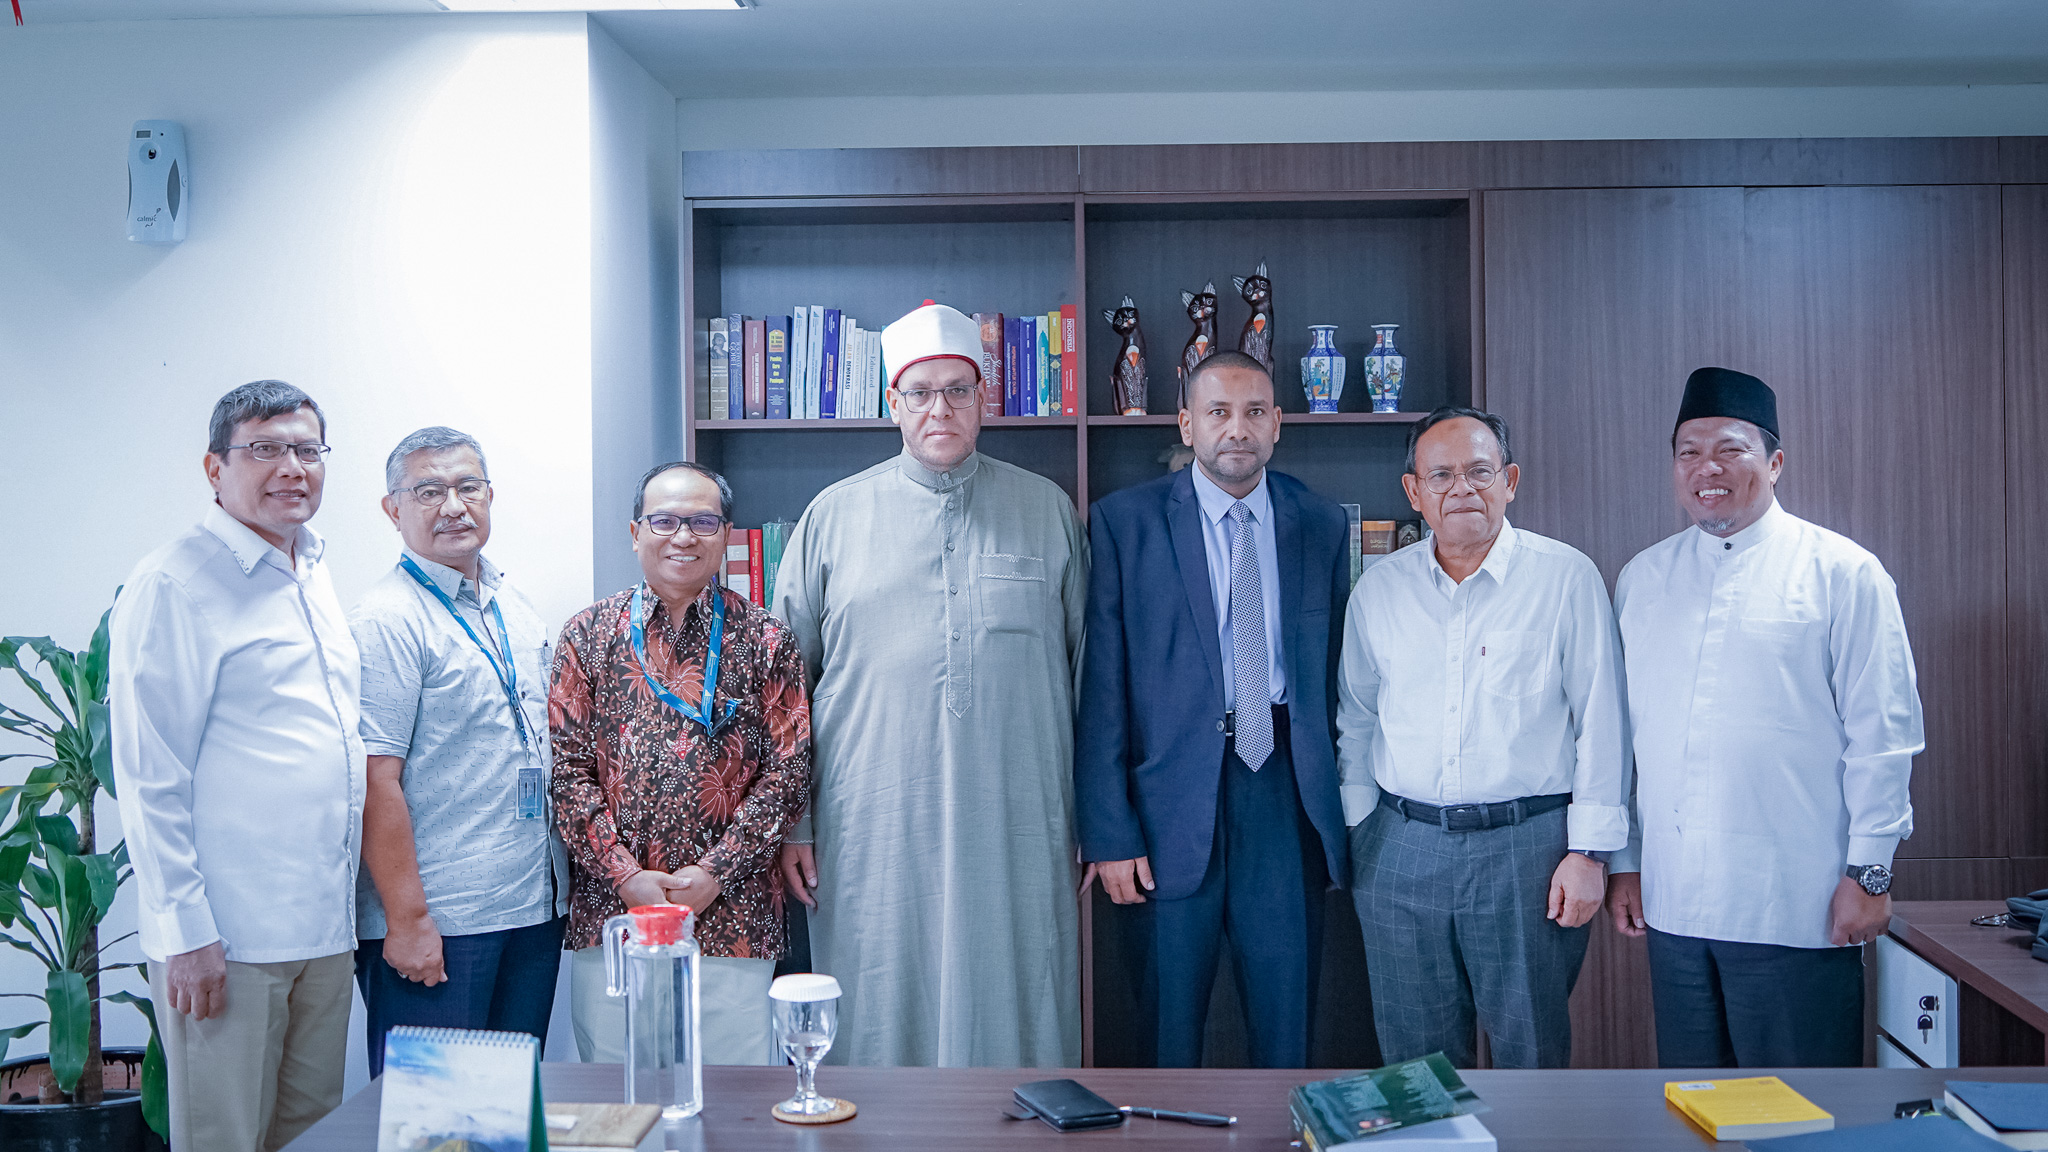 UIII welcomed two lecturers from Al-Azhar University